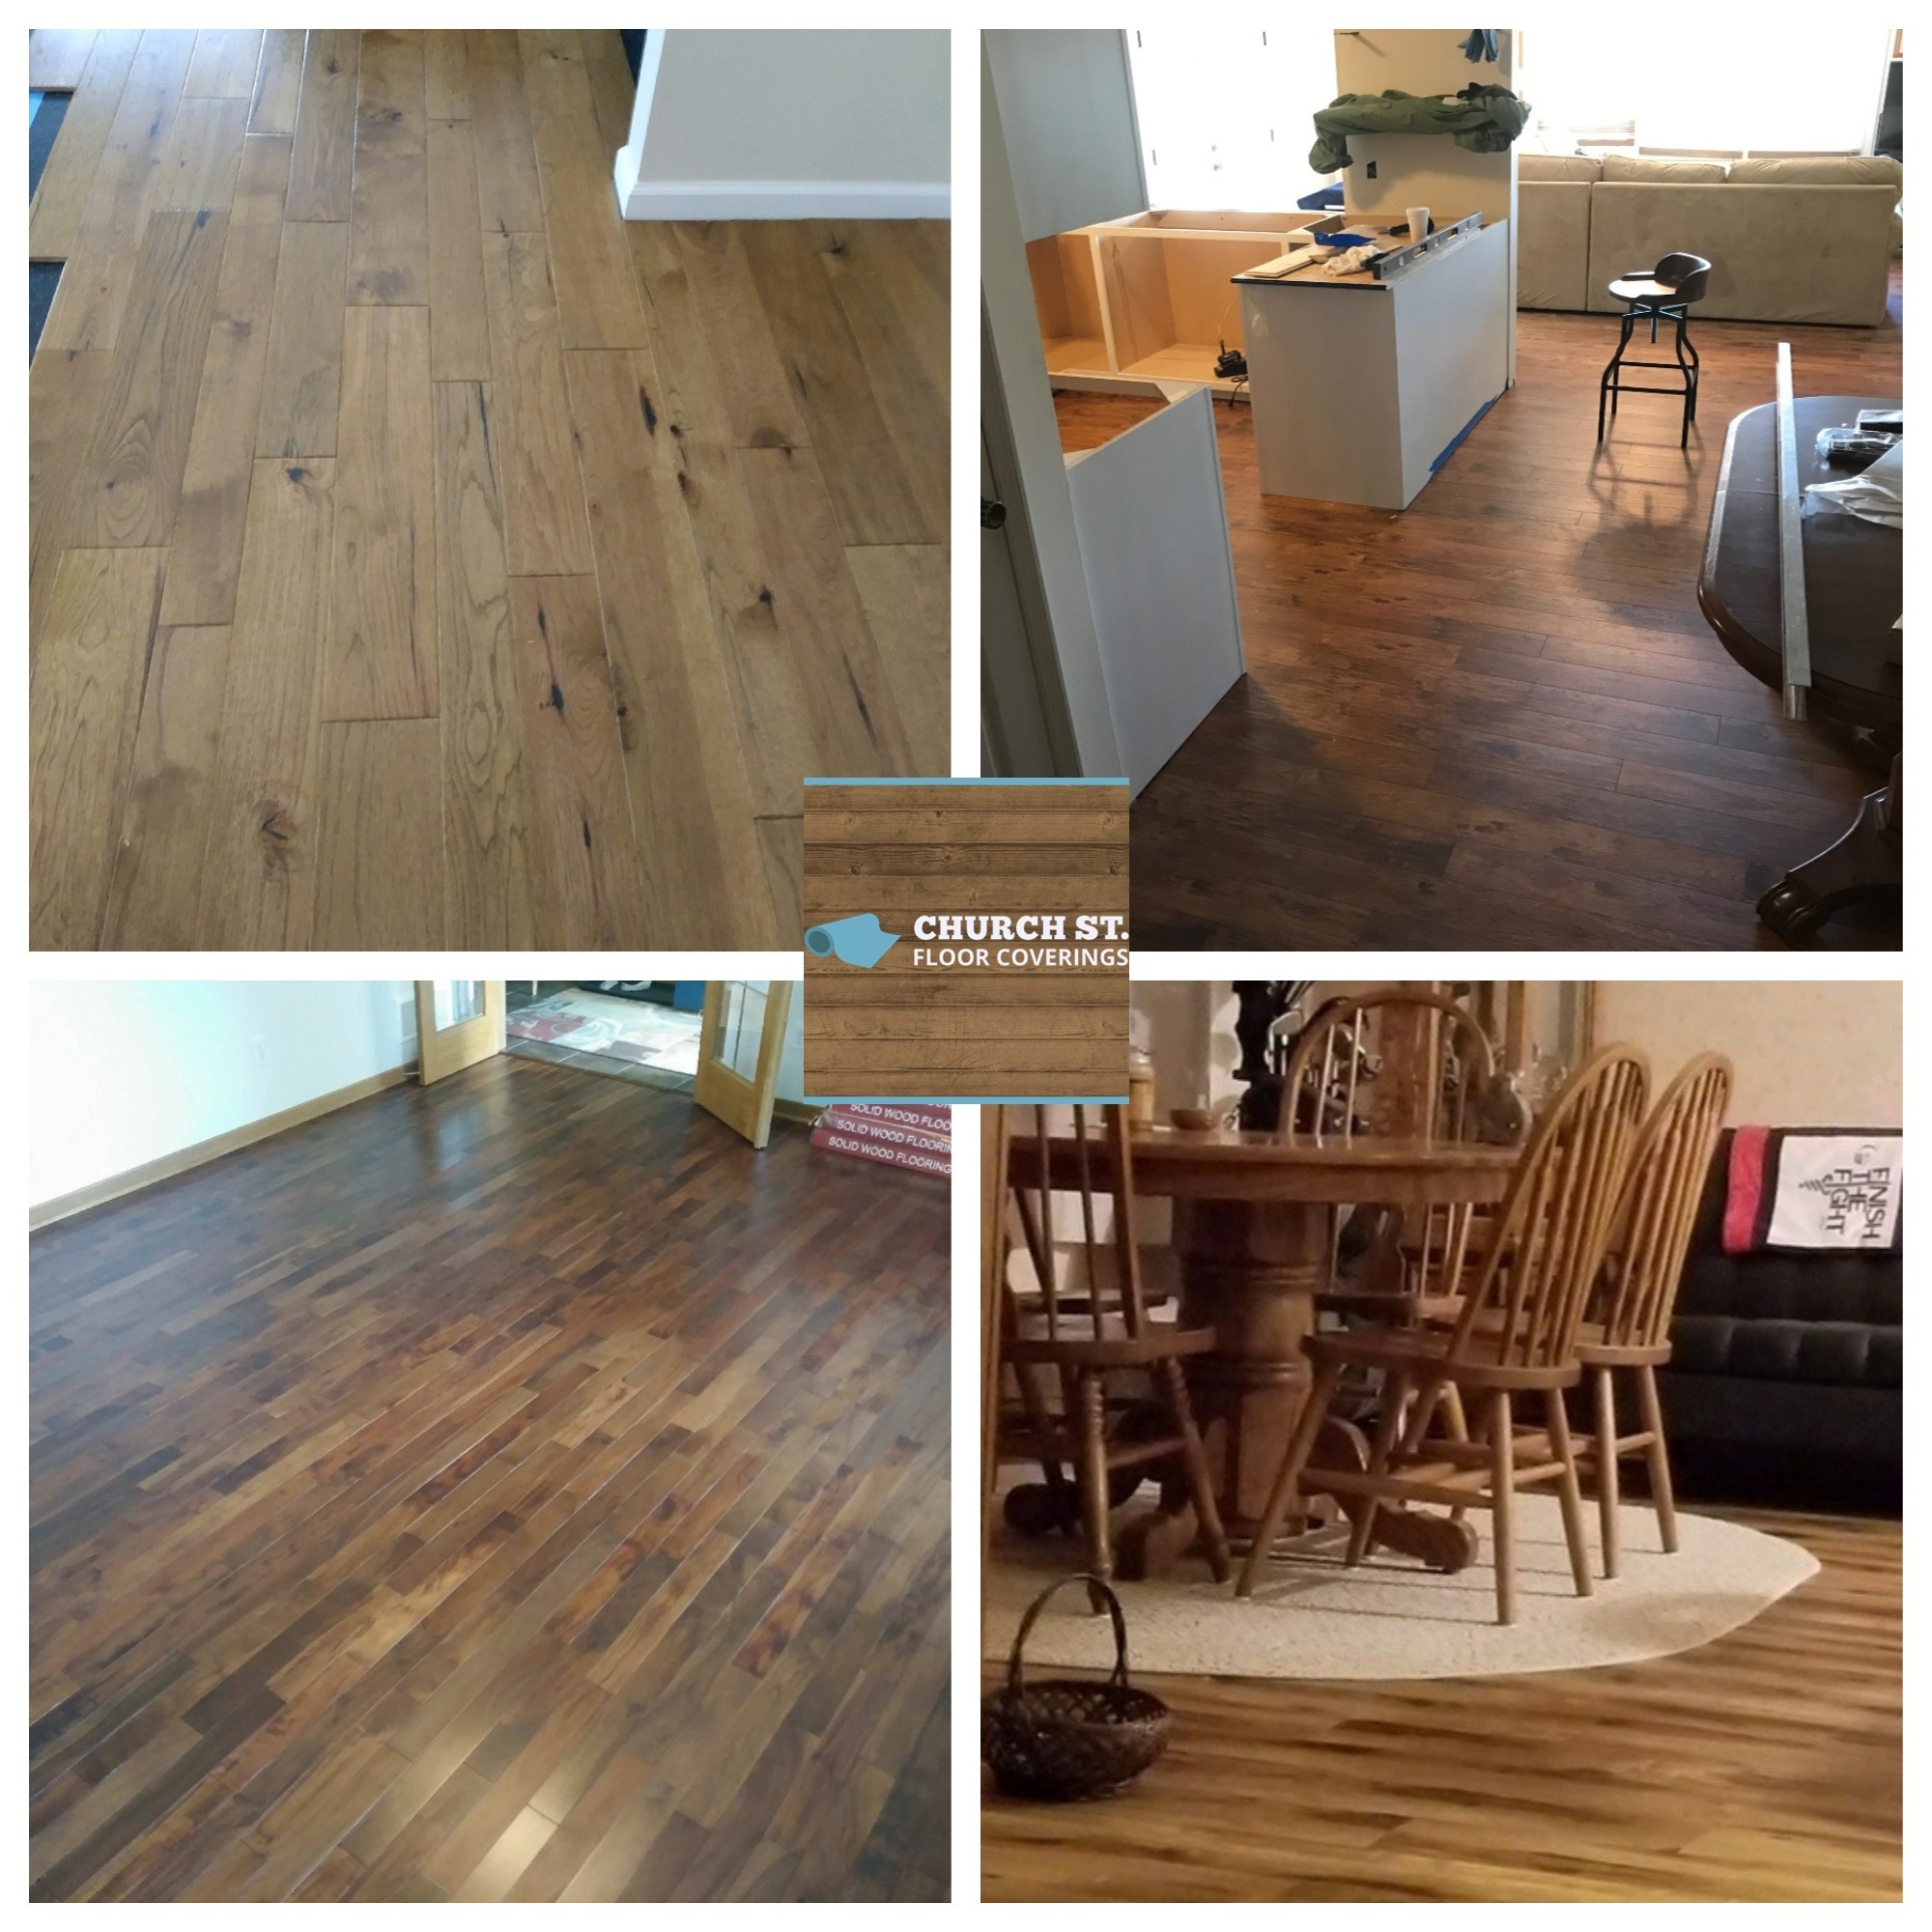 When it comes to your hardwood flooring needs, we are the ones to contact! Church Street Floor Coverings Newark (740)345-5905